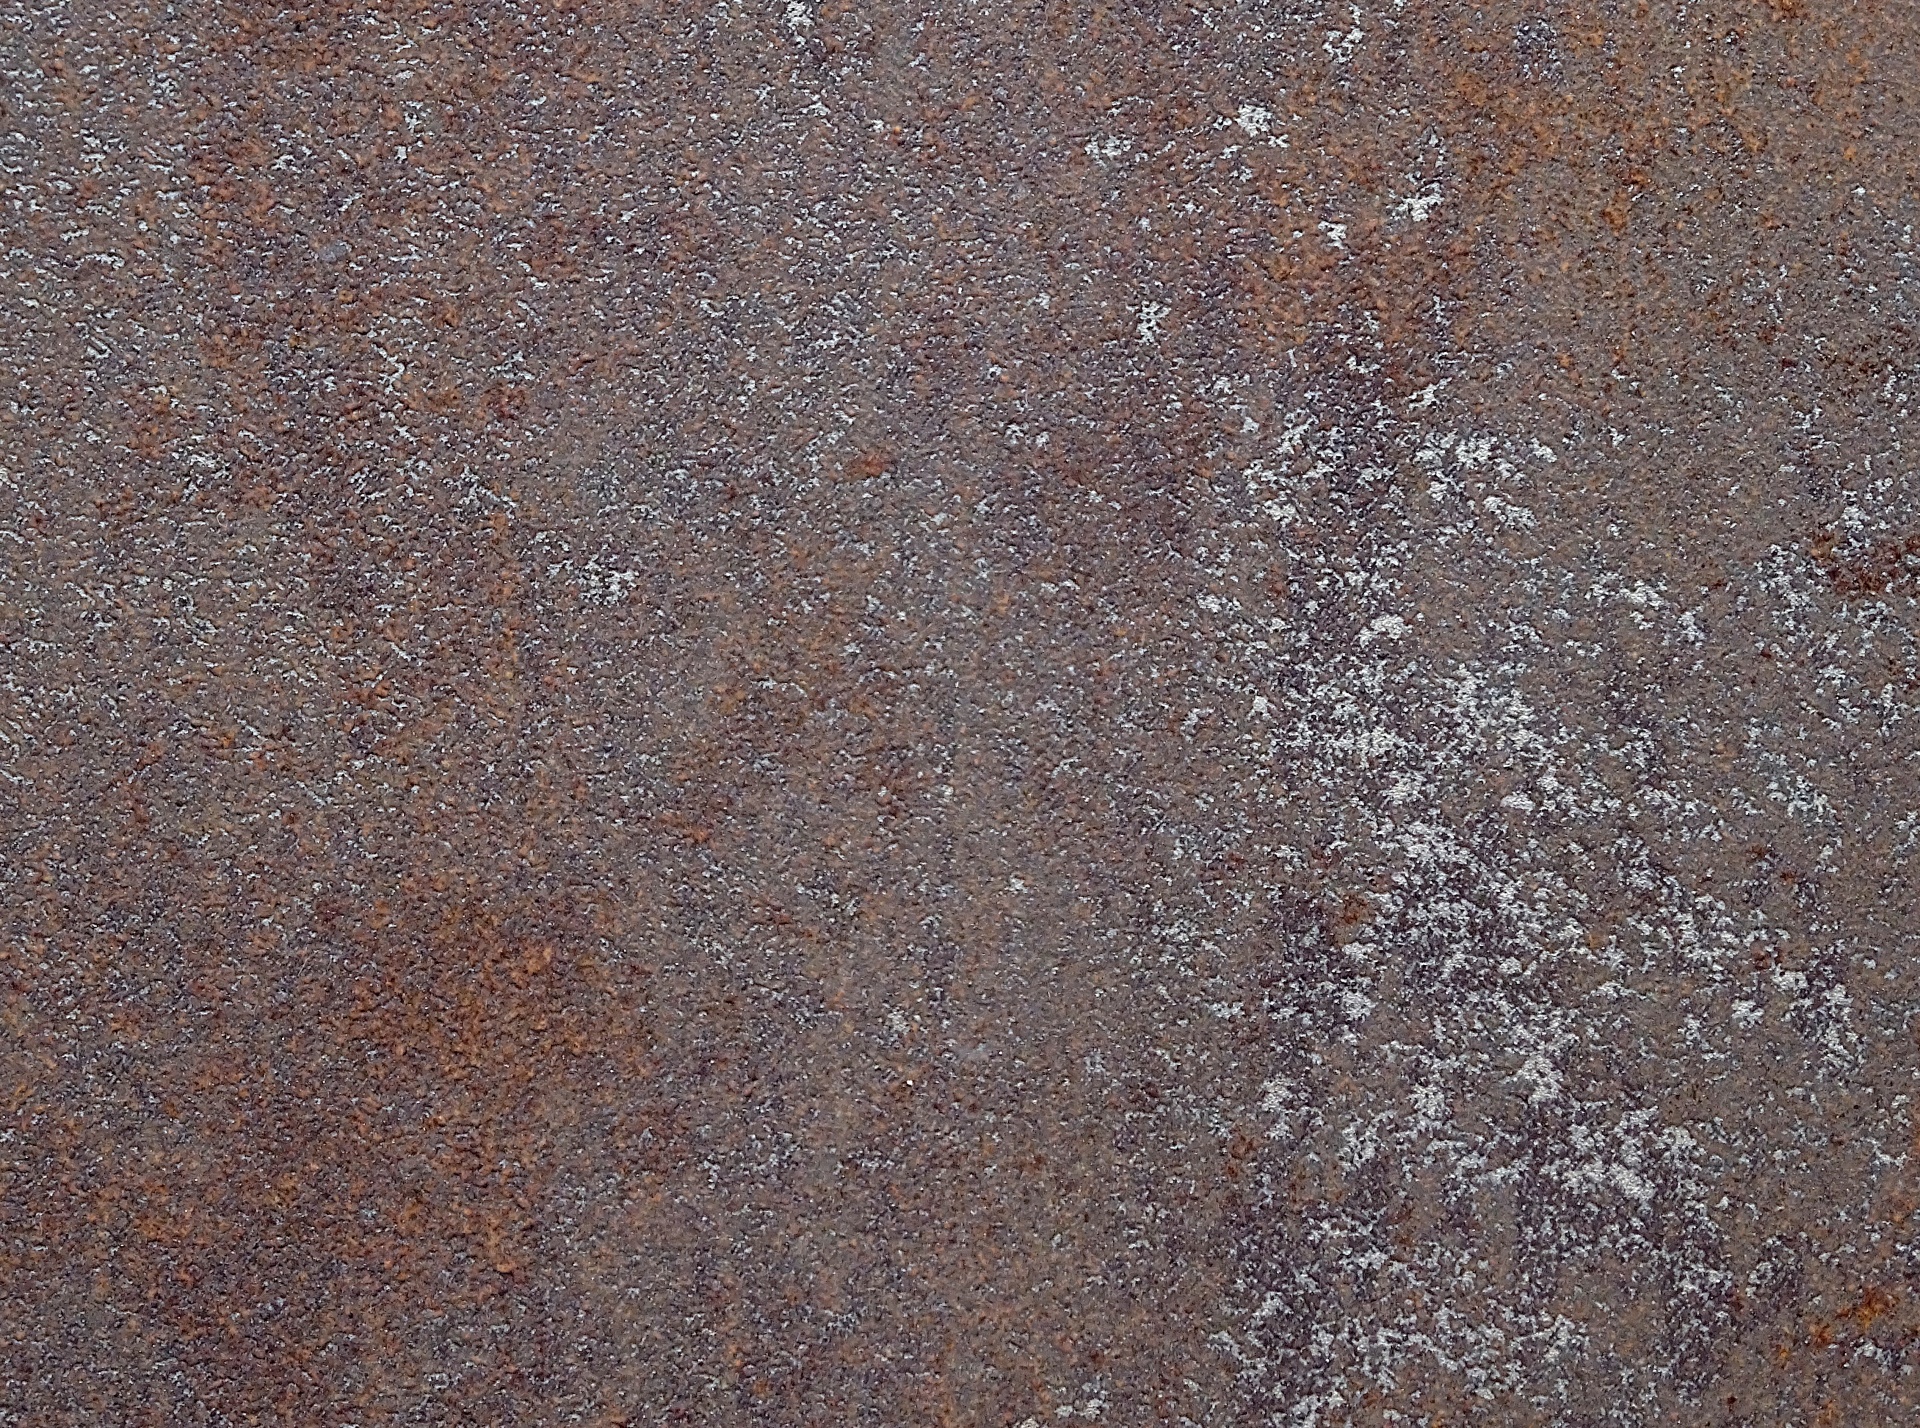 Corroded Rusty Metal Background